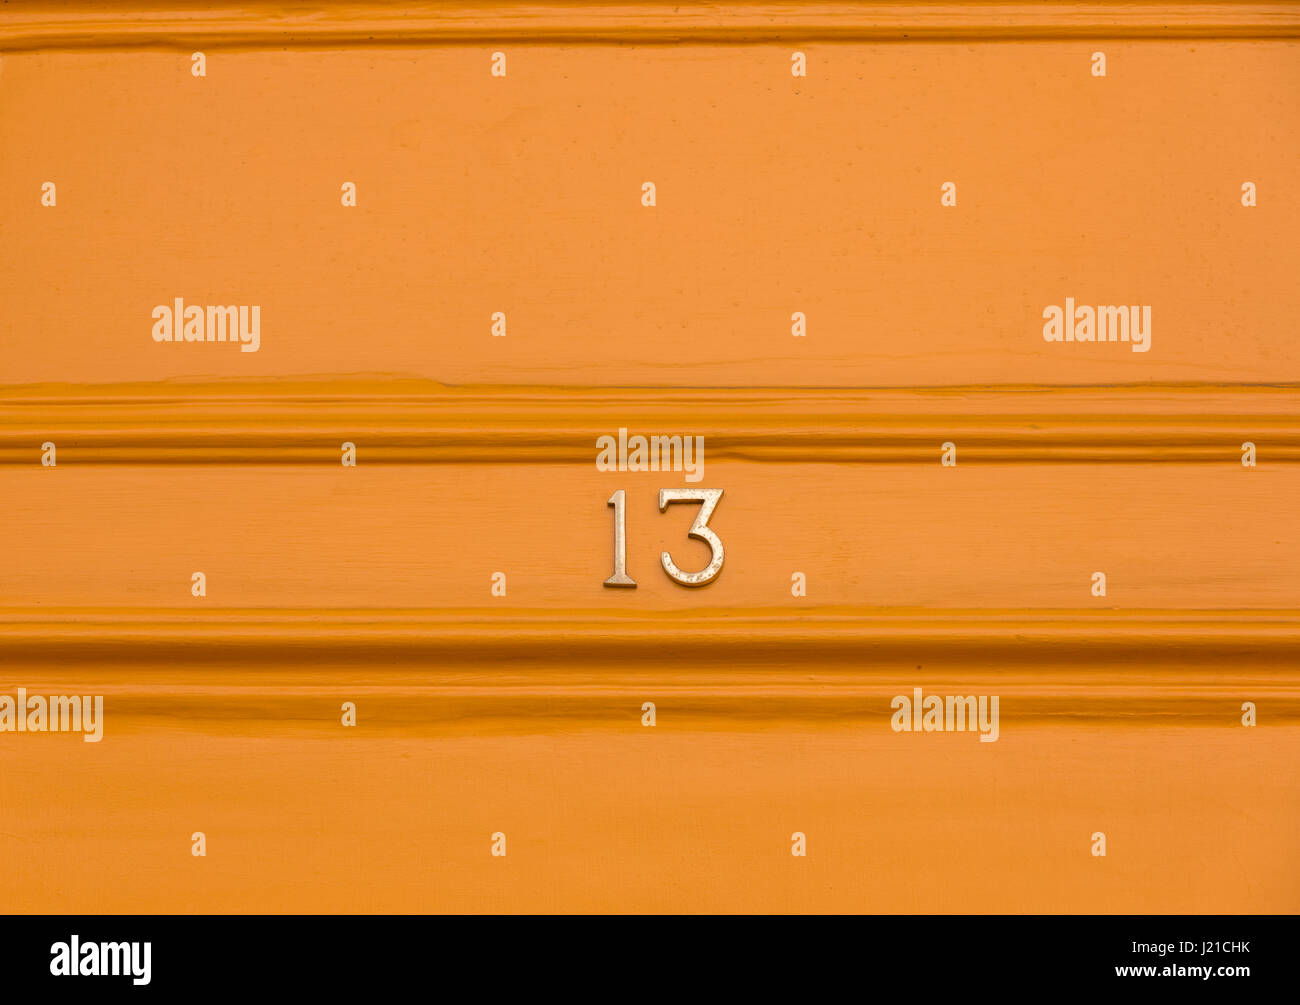 the-number-13-in-brass-numbers-on-an-orange-background-bath-england